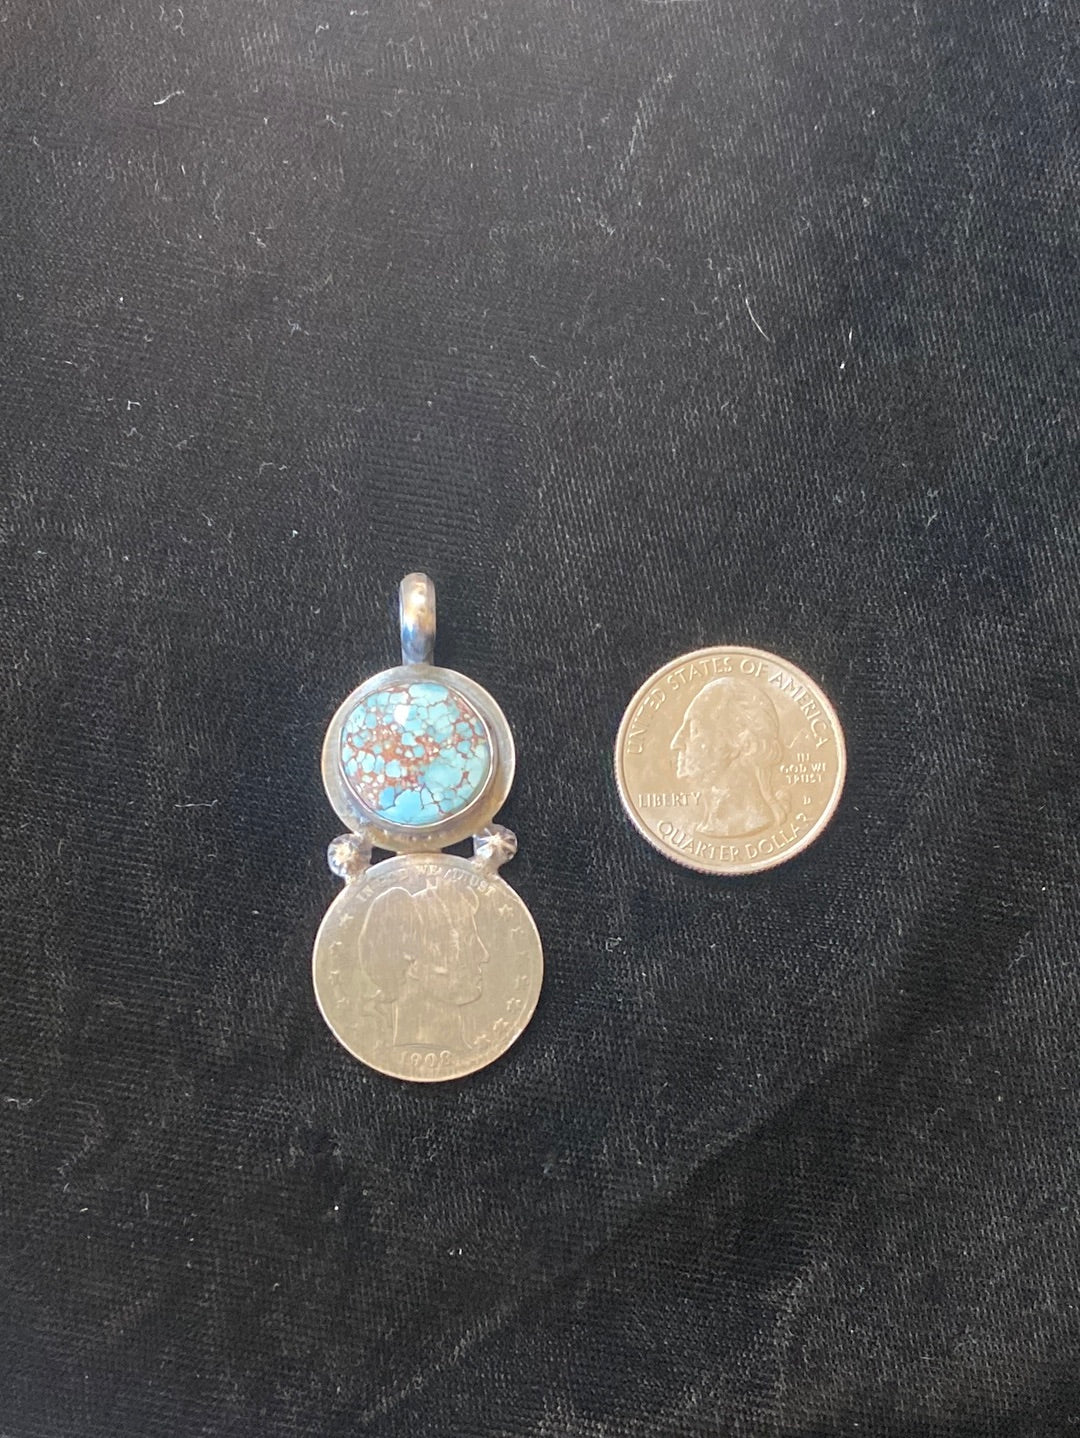 Golden Hill Turquoise Silver 1908 Pendant